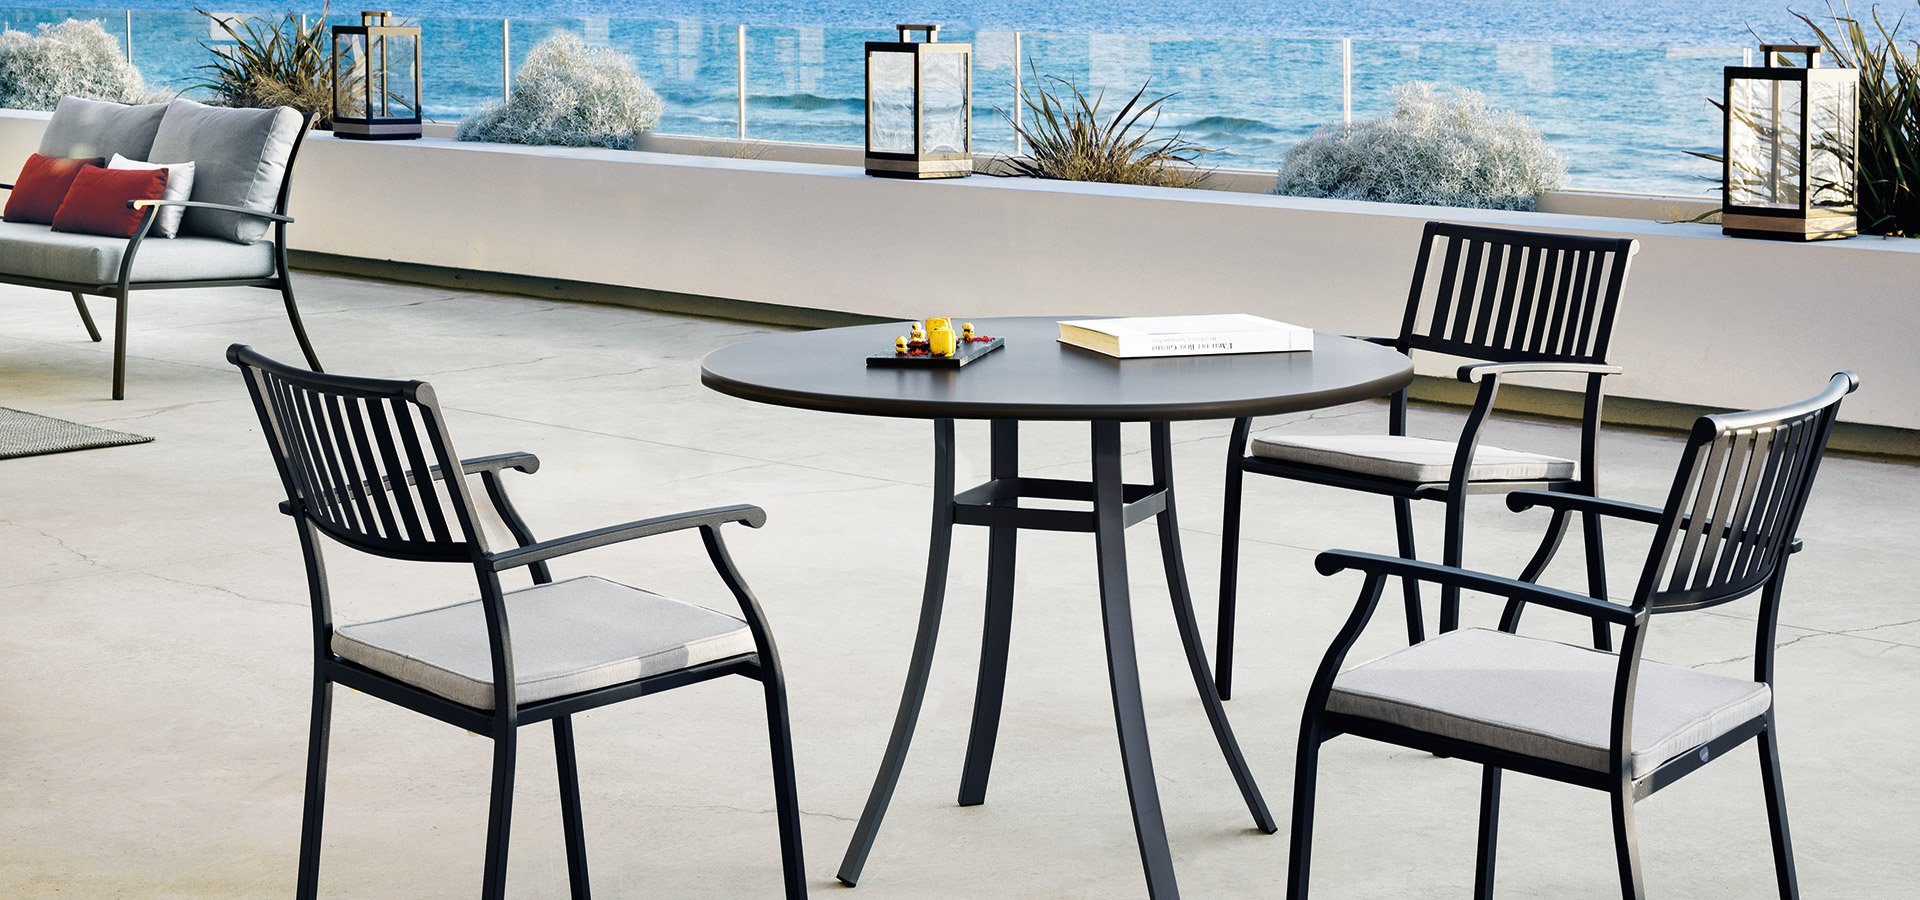 Elisir Dining Chair from Ethimo, designed by Ethimo Studio